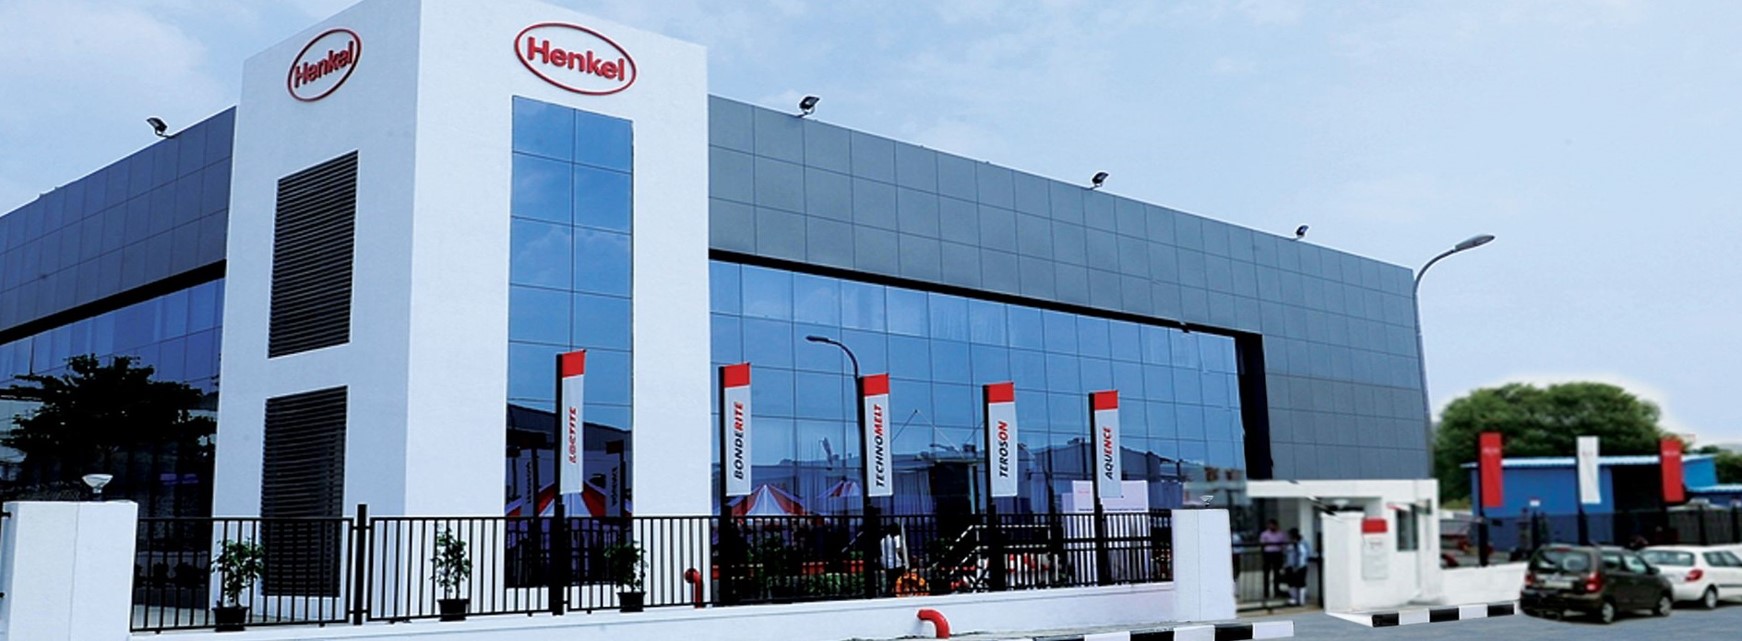 Chemical and consumer goods company Henkel